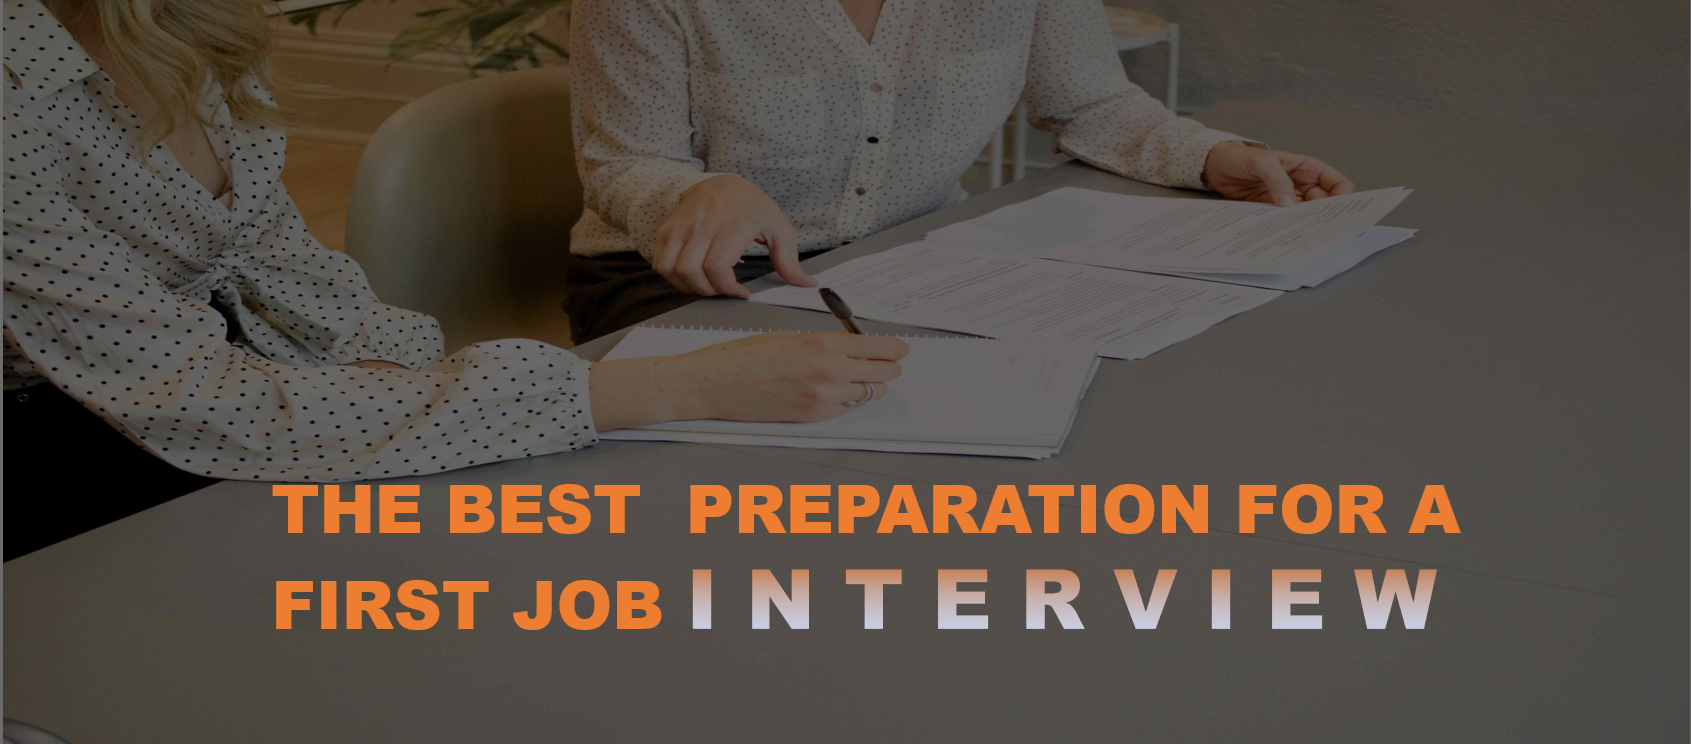 The Best Preparation for a First Job Interview